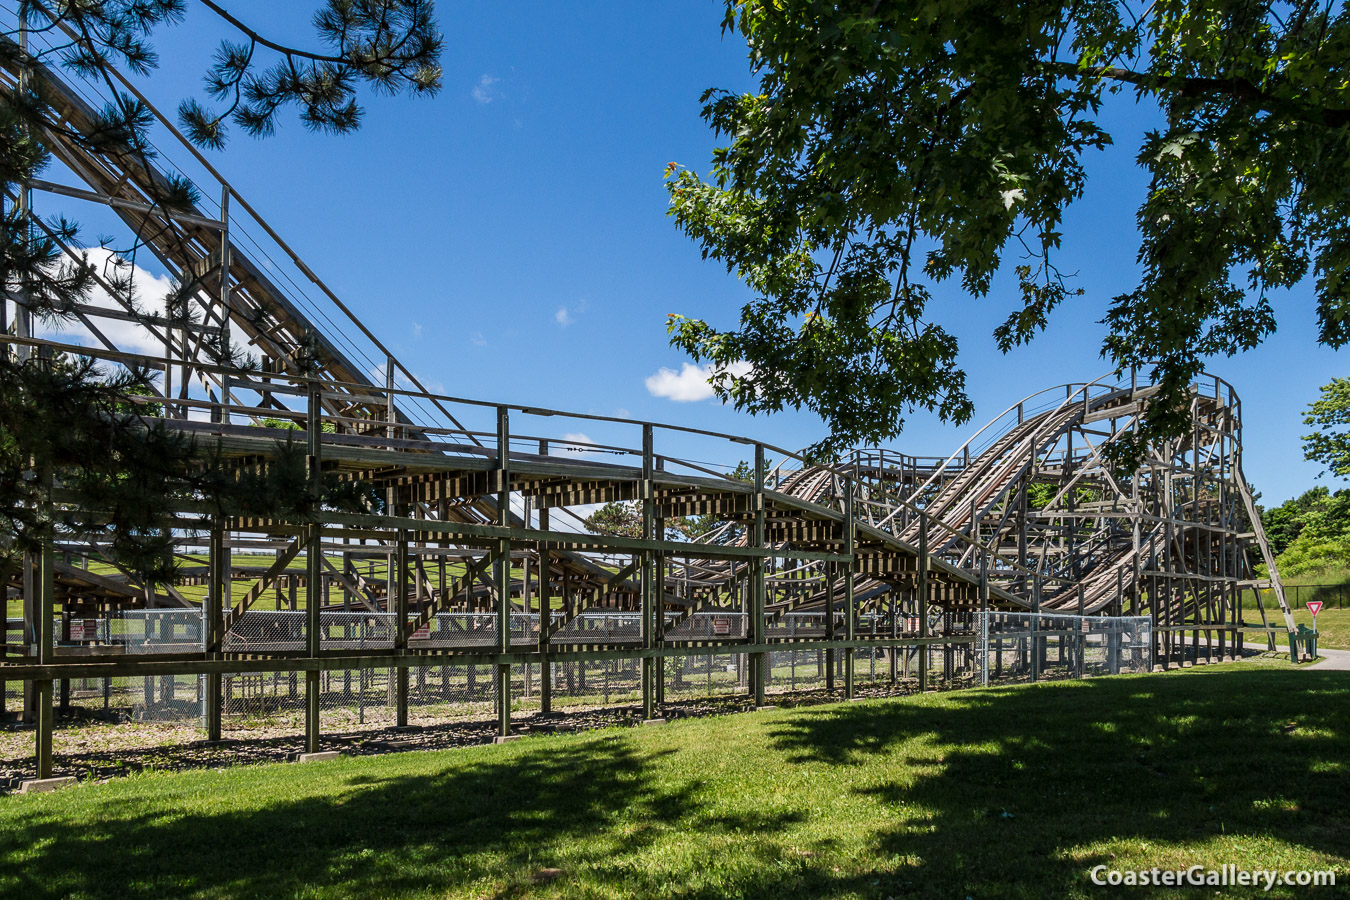 How long is the Ghoster Coaster roller coaster track? CoasterGallery.com has the answers to your amusement park questions!